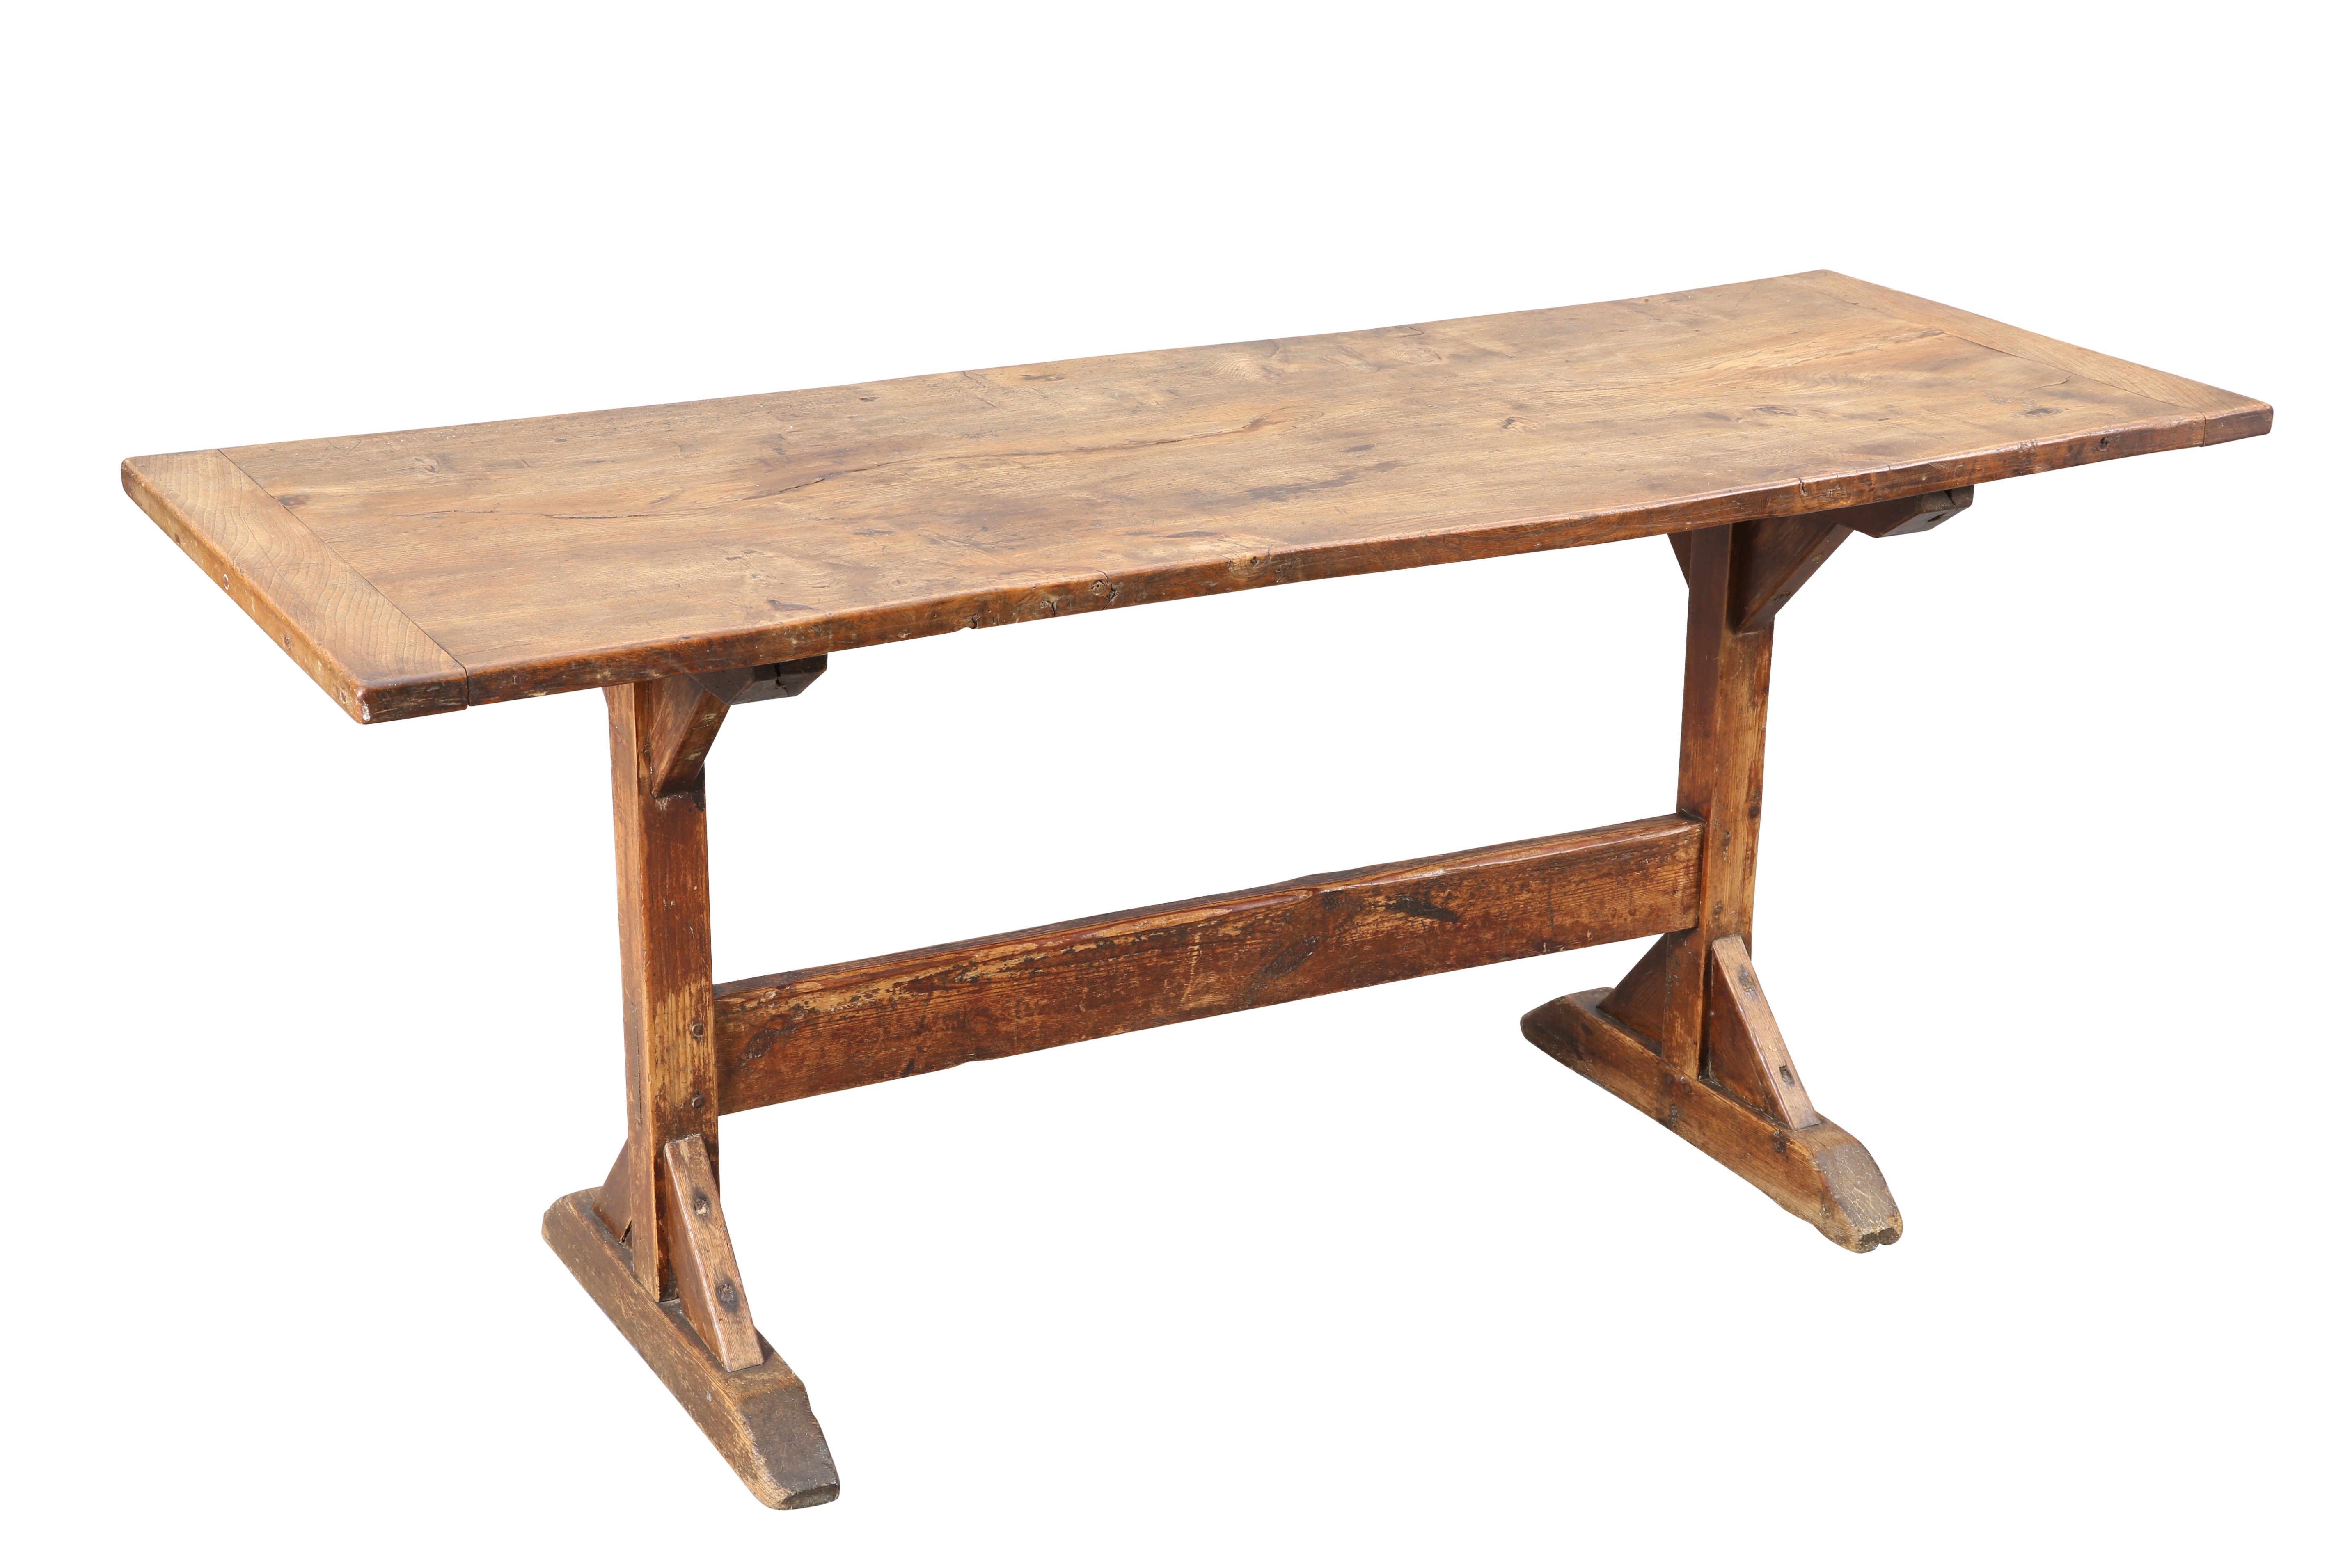 AN ELM AND PINE TAVERN TABLE